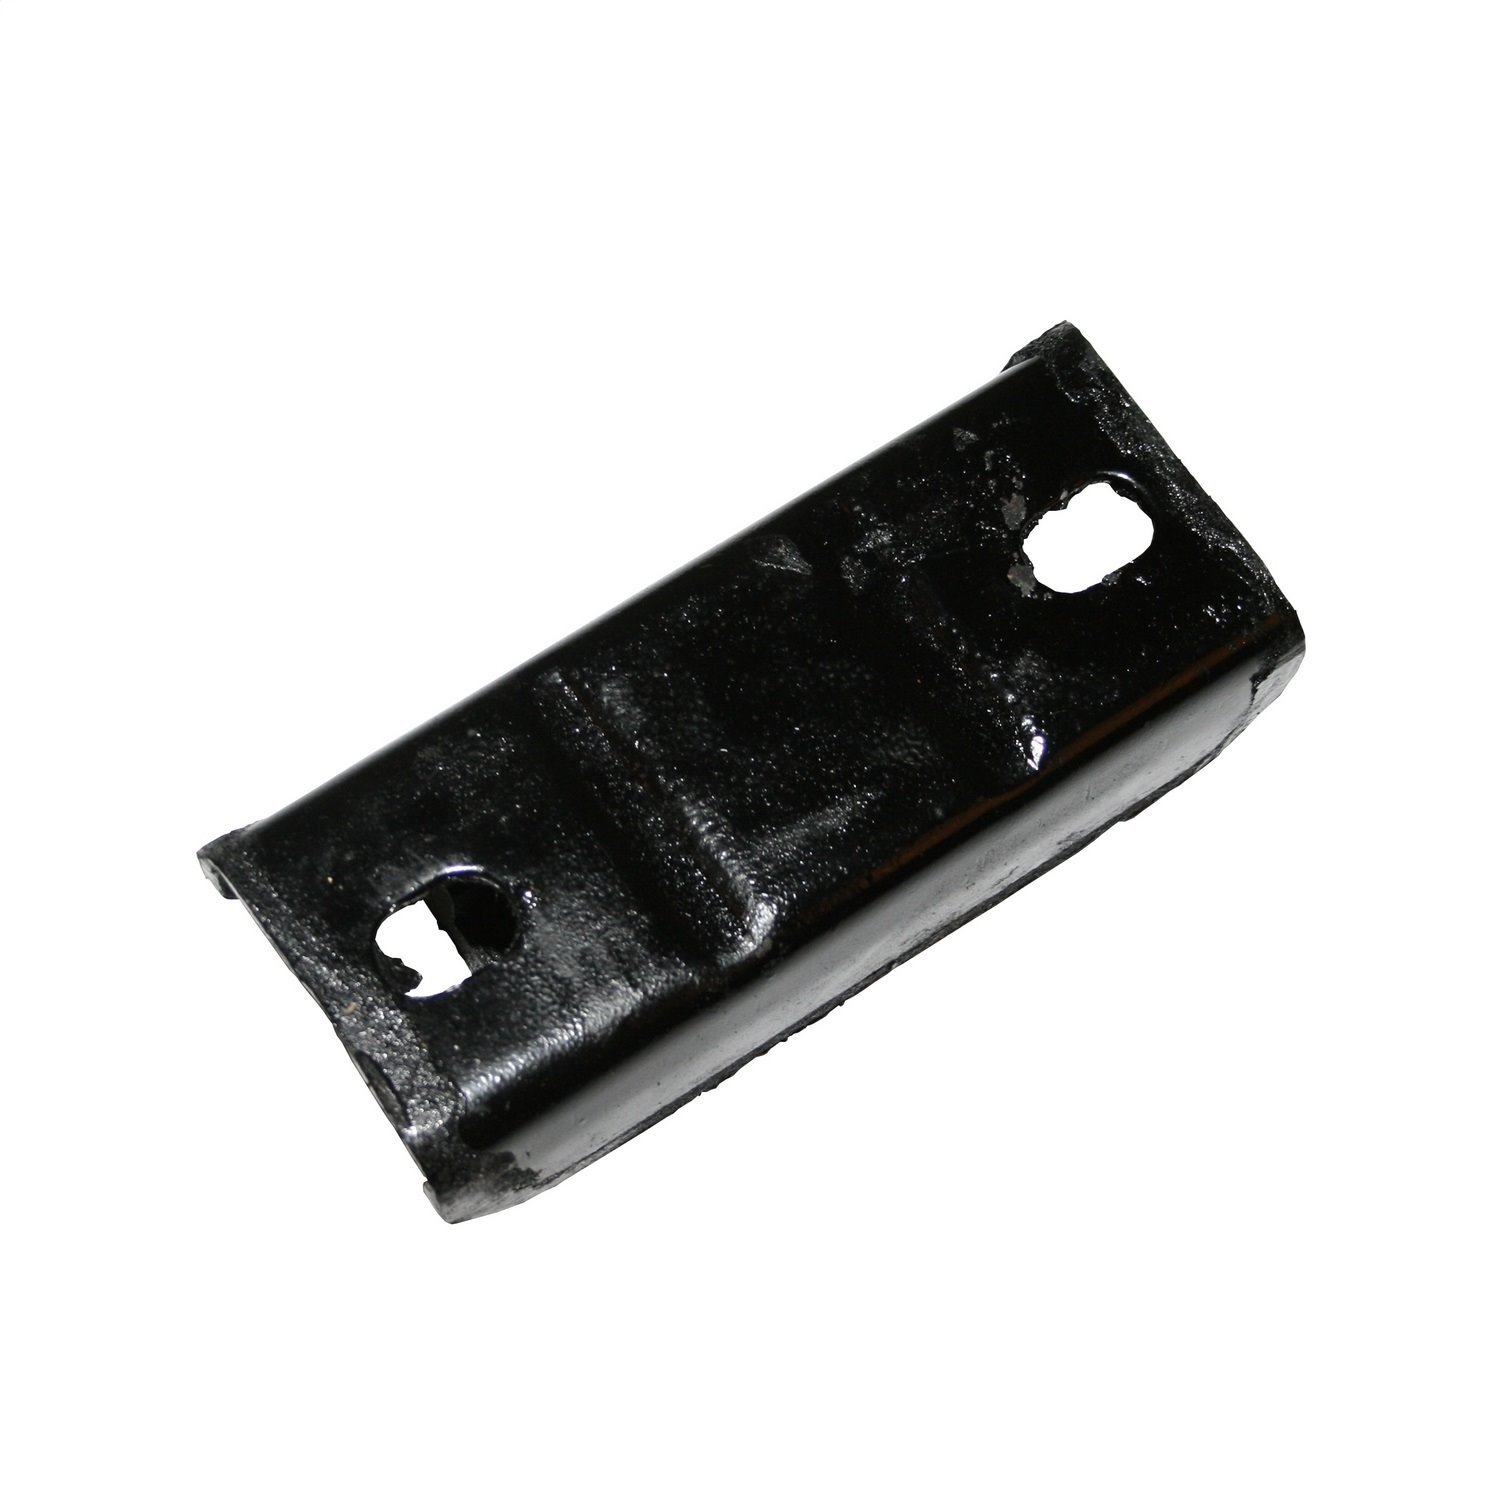 Stock replacement rubber transfer case mount from Omix-ADA, Fits all transfer cases in 71-86 Jee